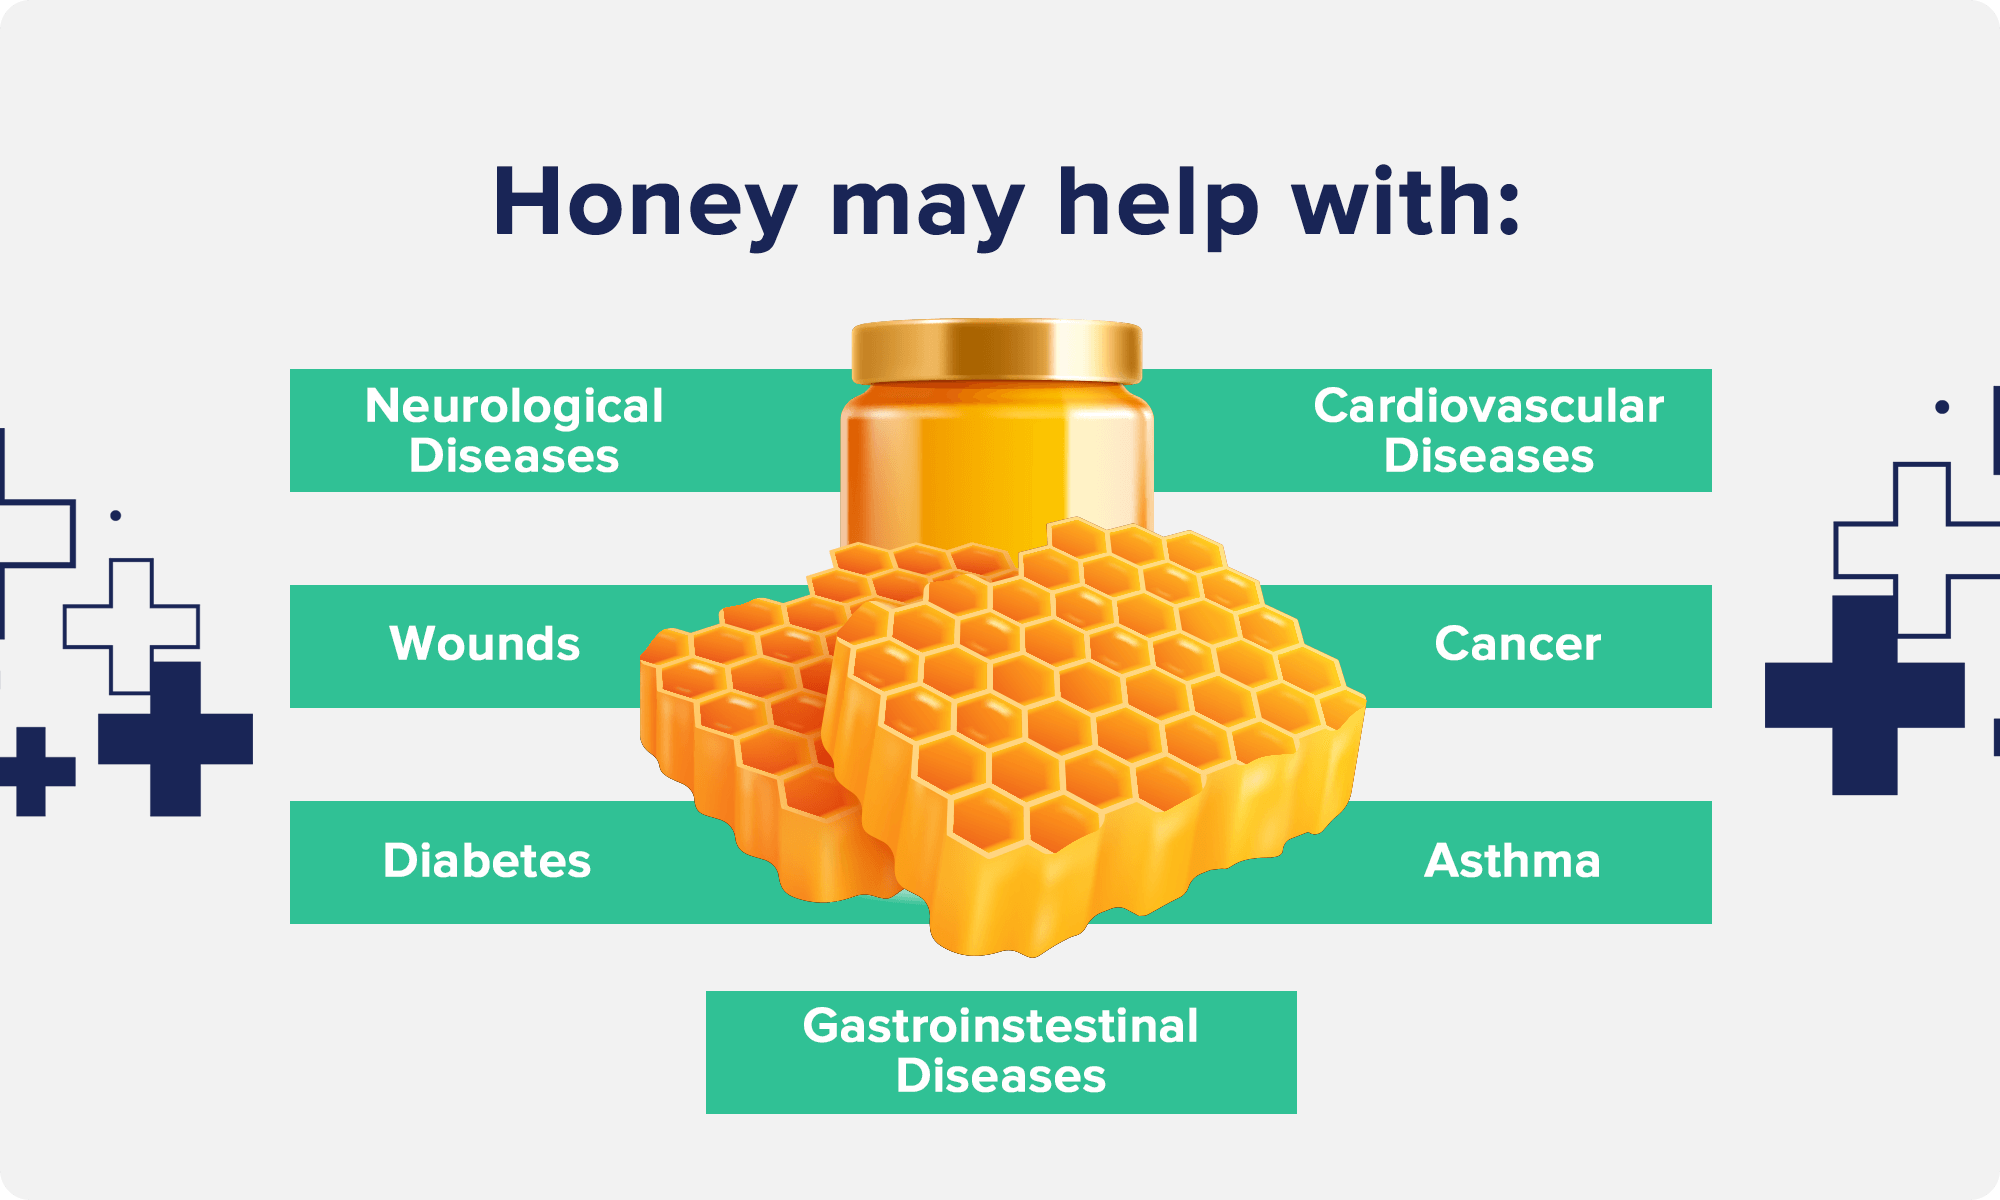 Honey may help with